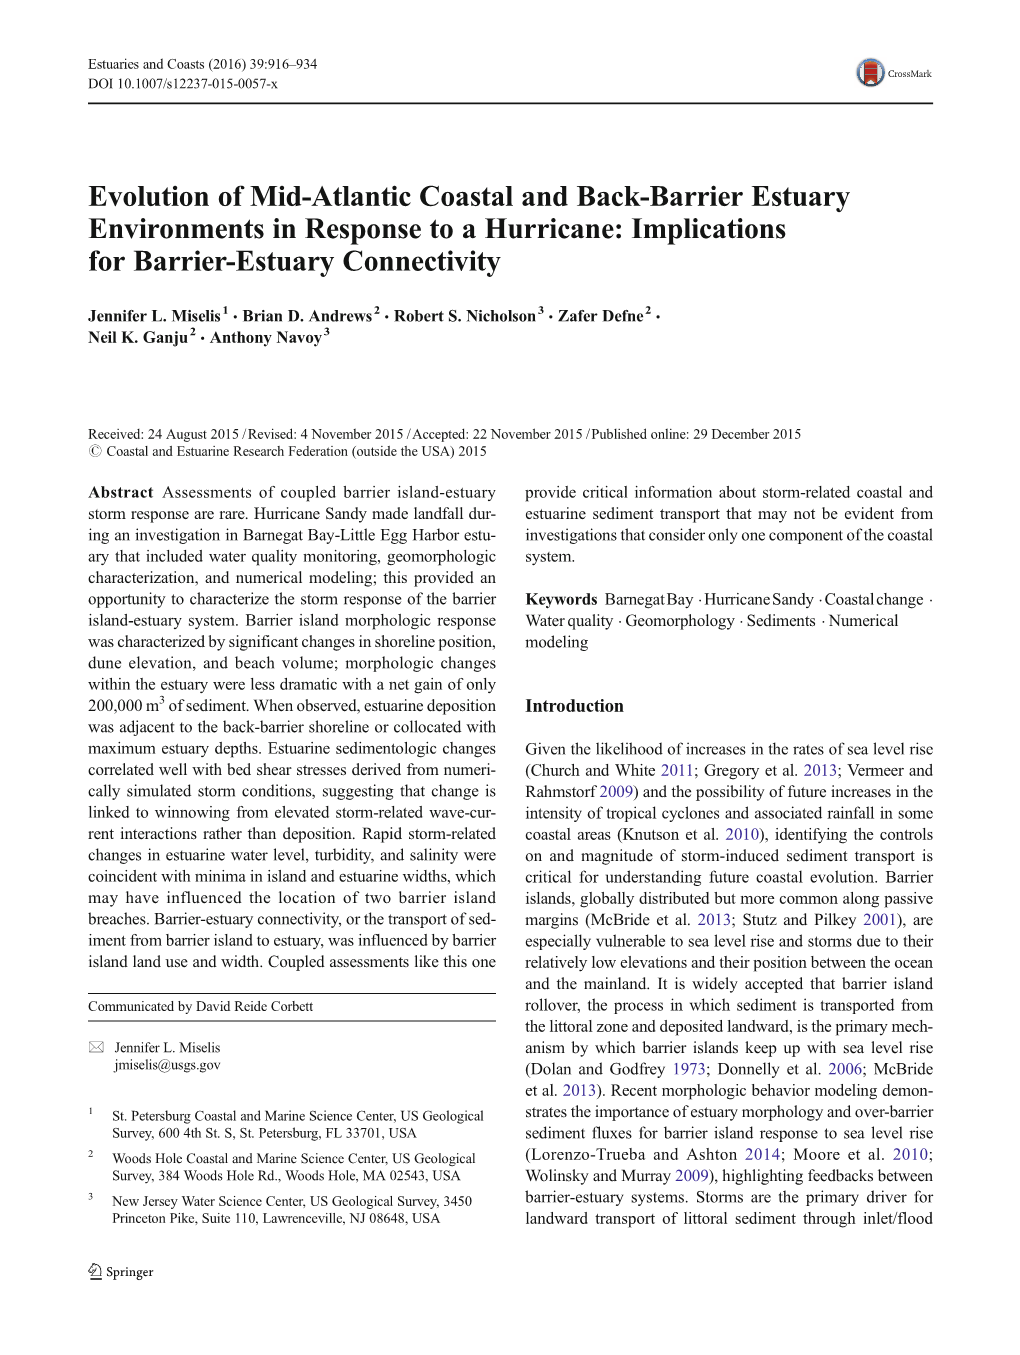 Evolution of Mid-Atlantic Coastal and Back-Barrier Estuary Environments in Response to a Hurricane: Implications for Barrier-Estuary Connectivity